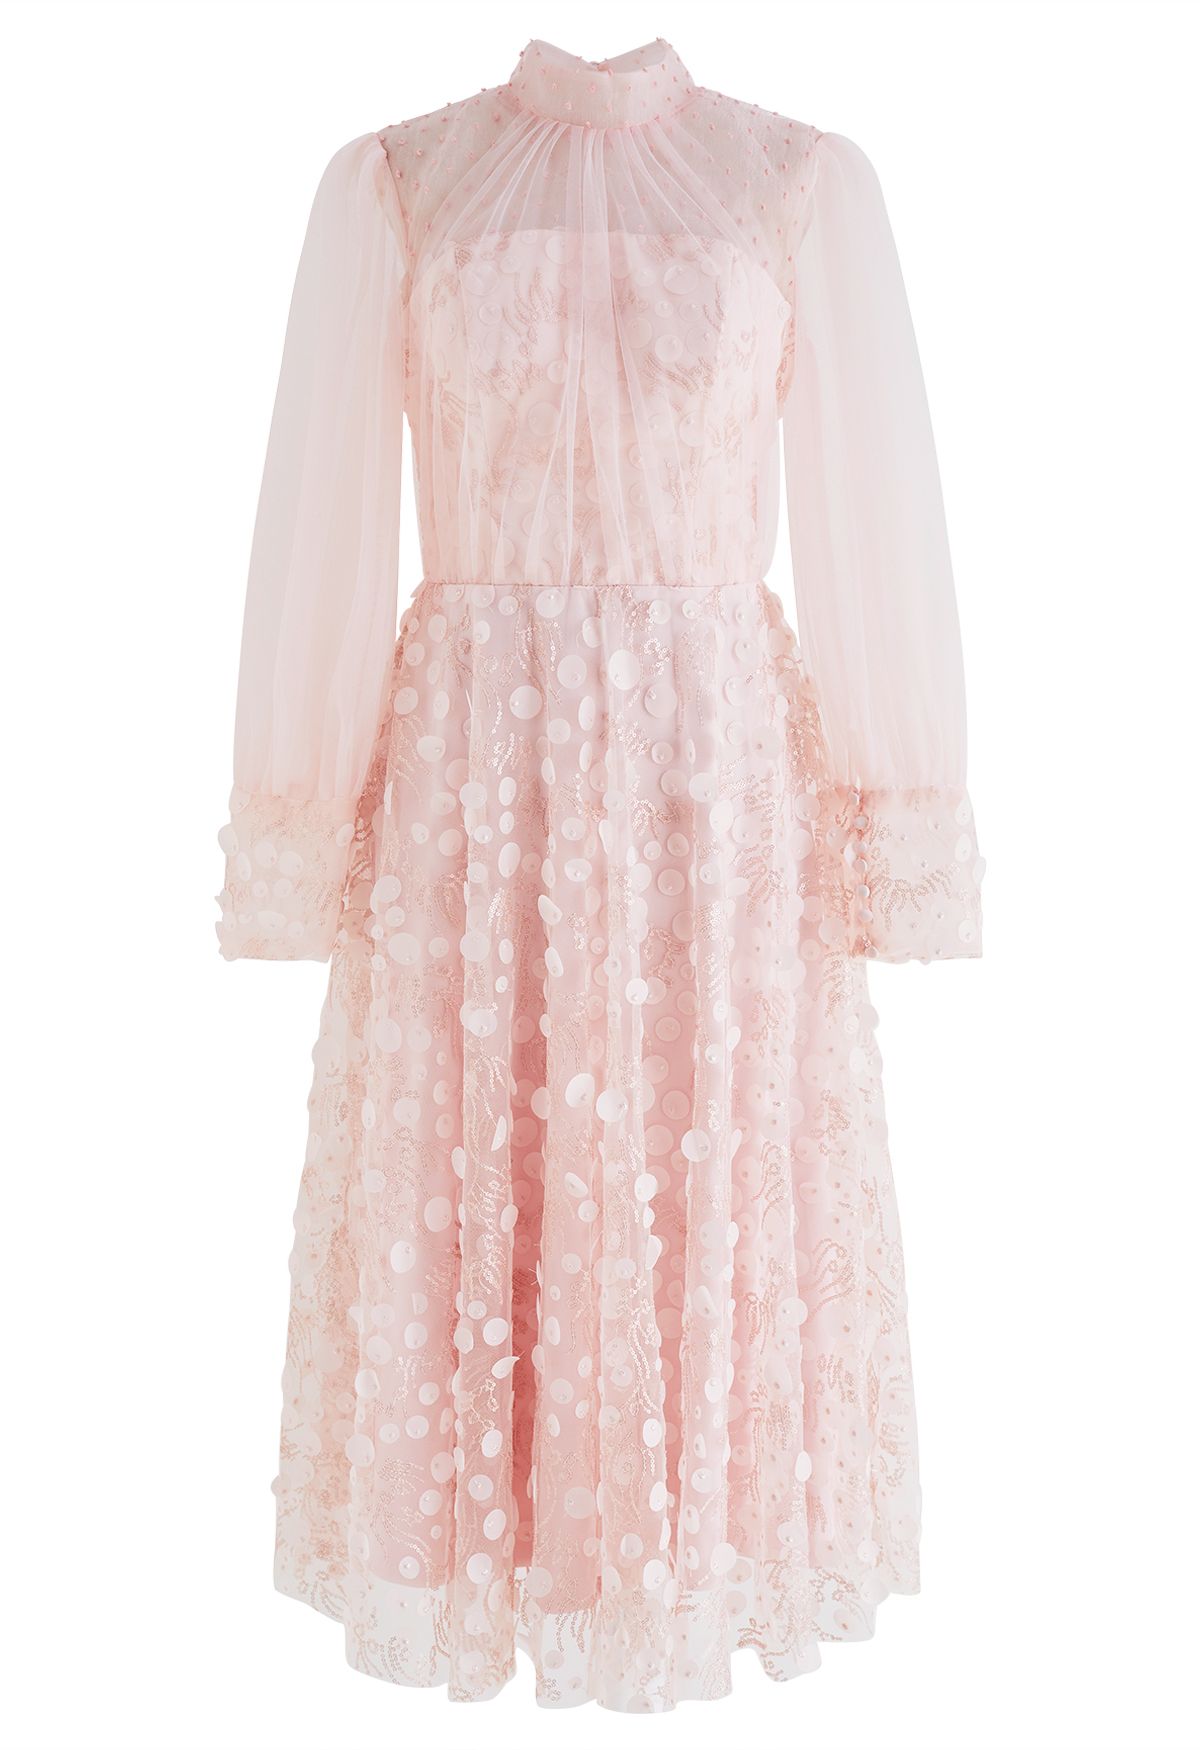 Dreamtime Pink Mesh Tulle Dress - Retro, Indie and Unique Fashion